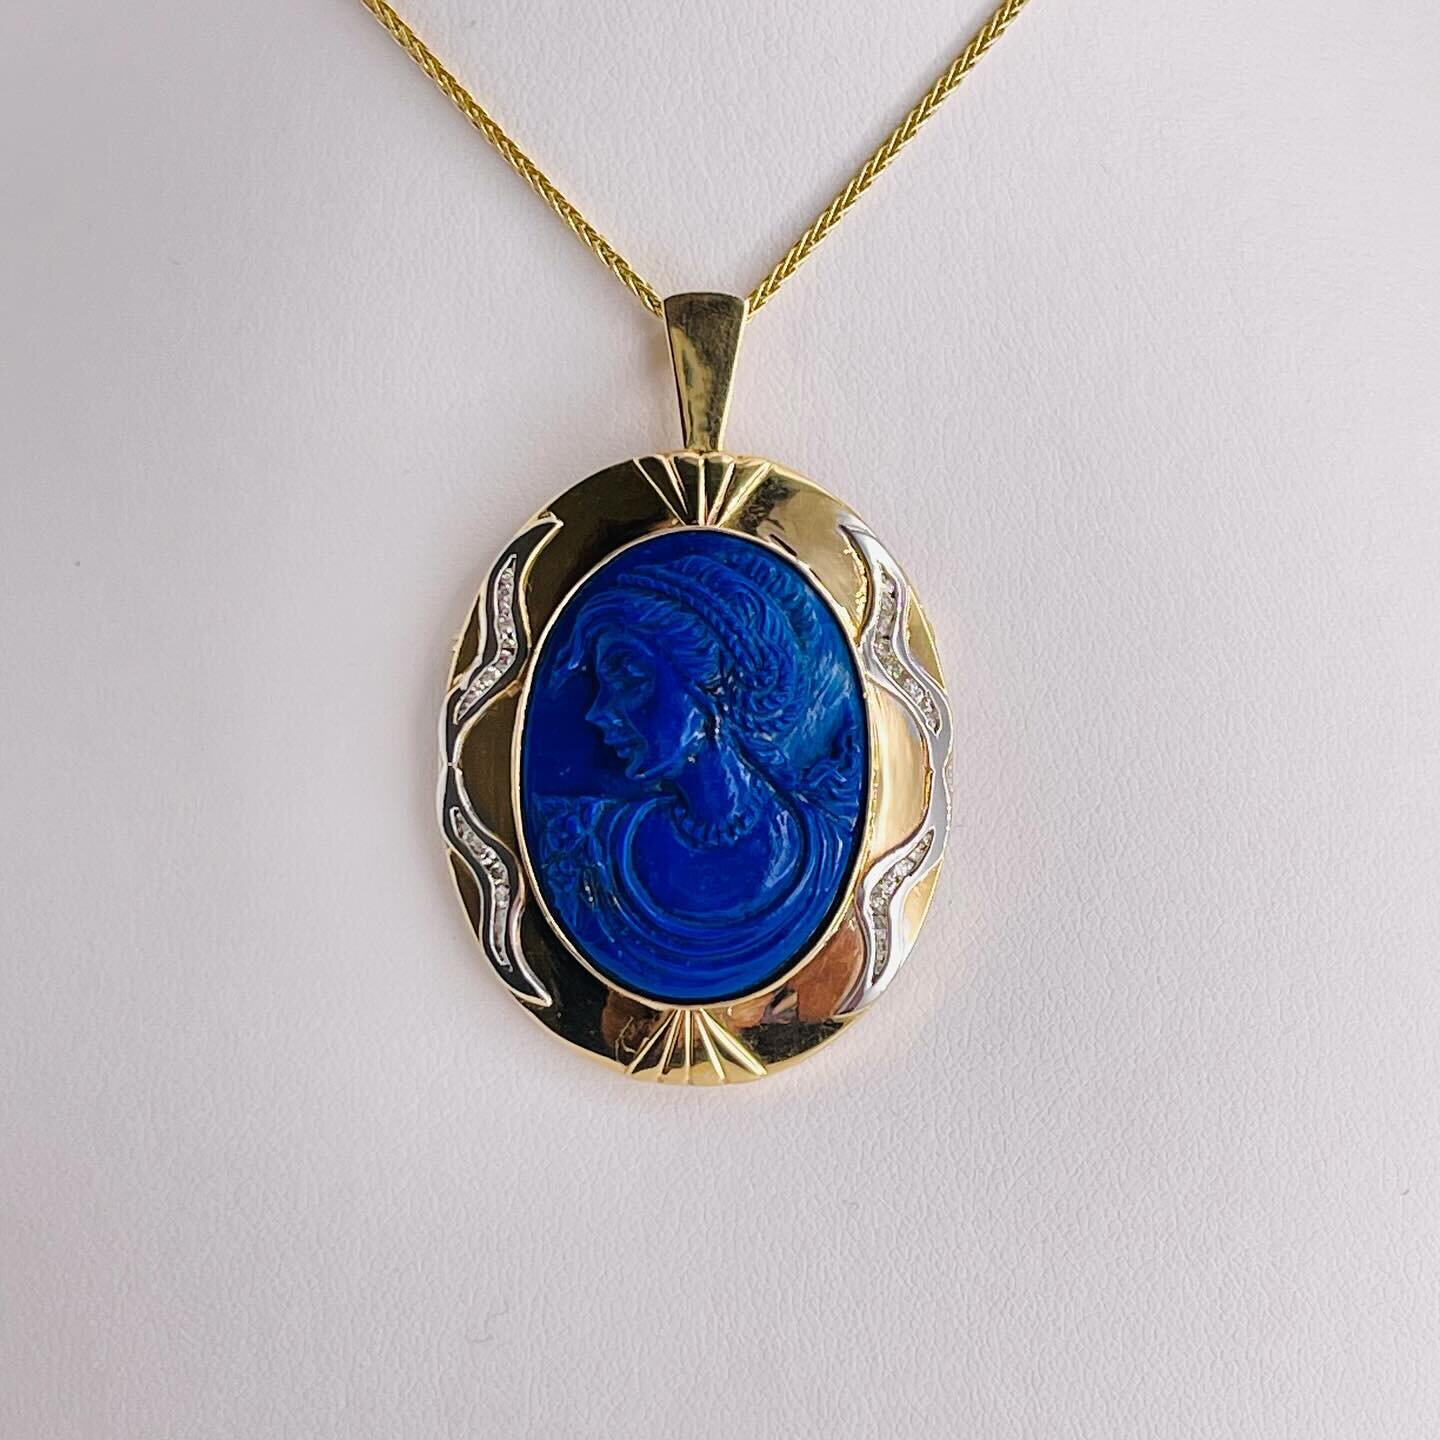 18 karat yellow gold Lapis Lazuli cameo pendant / brooch 

This pendant can also be use as a brooch!

Need more information?
Please message us.

#finejewel #gold #earring #ring #necklace #everyday
#14k #14kgold #14kwhitegold #whitegold  #jewellery #j